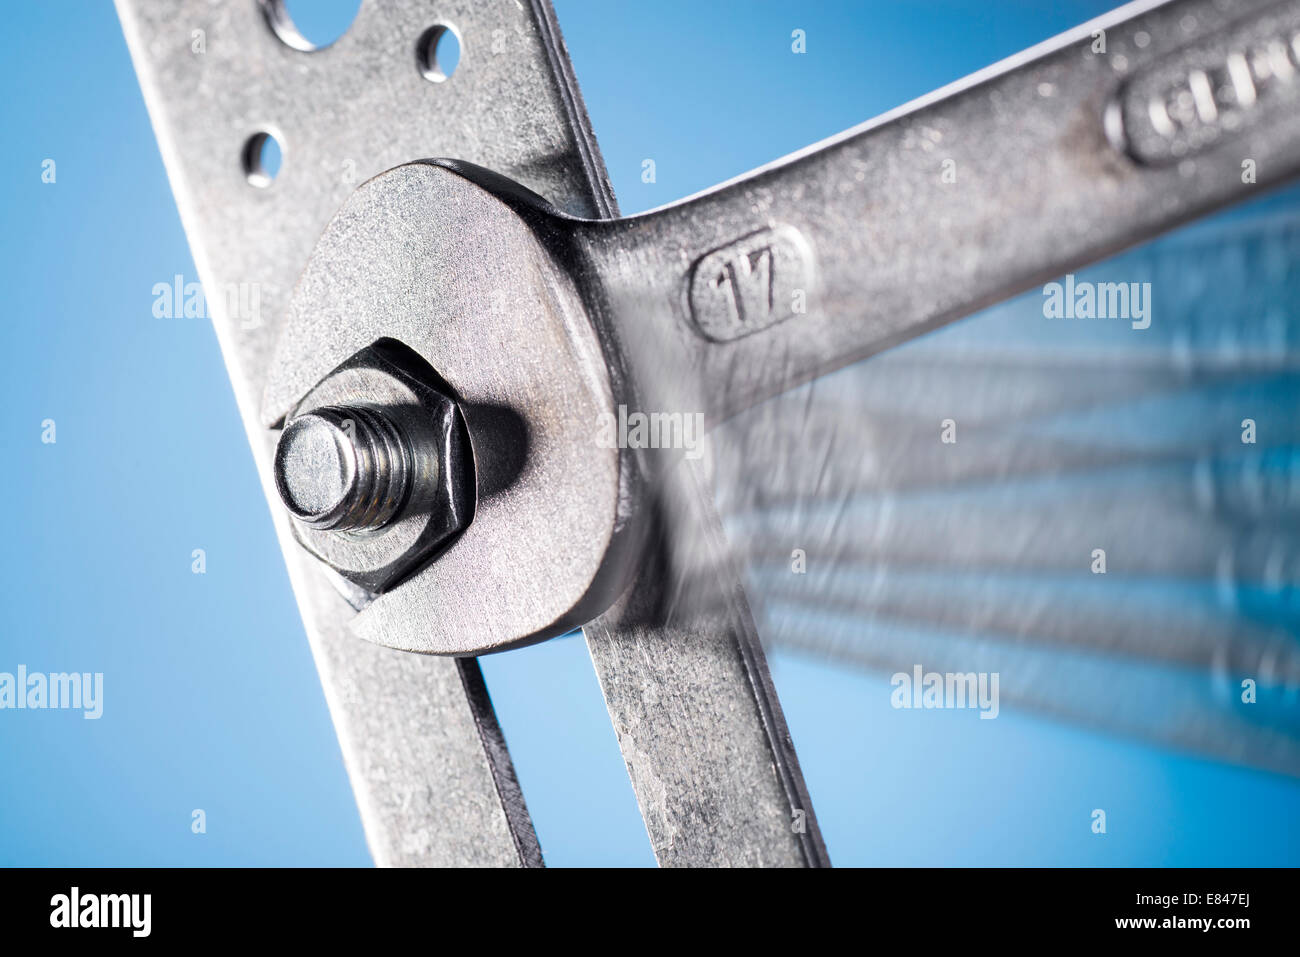 Close-up of a wrench, tighten the nut. Stock Photo